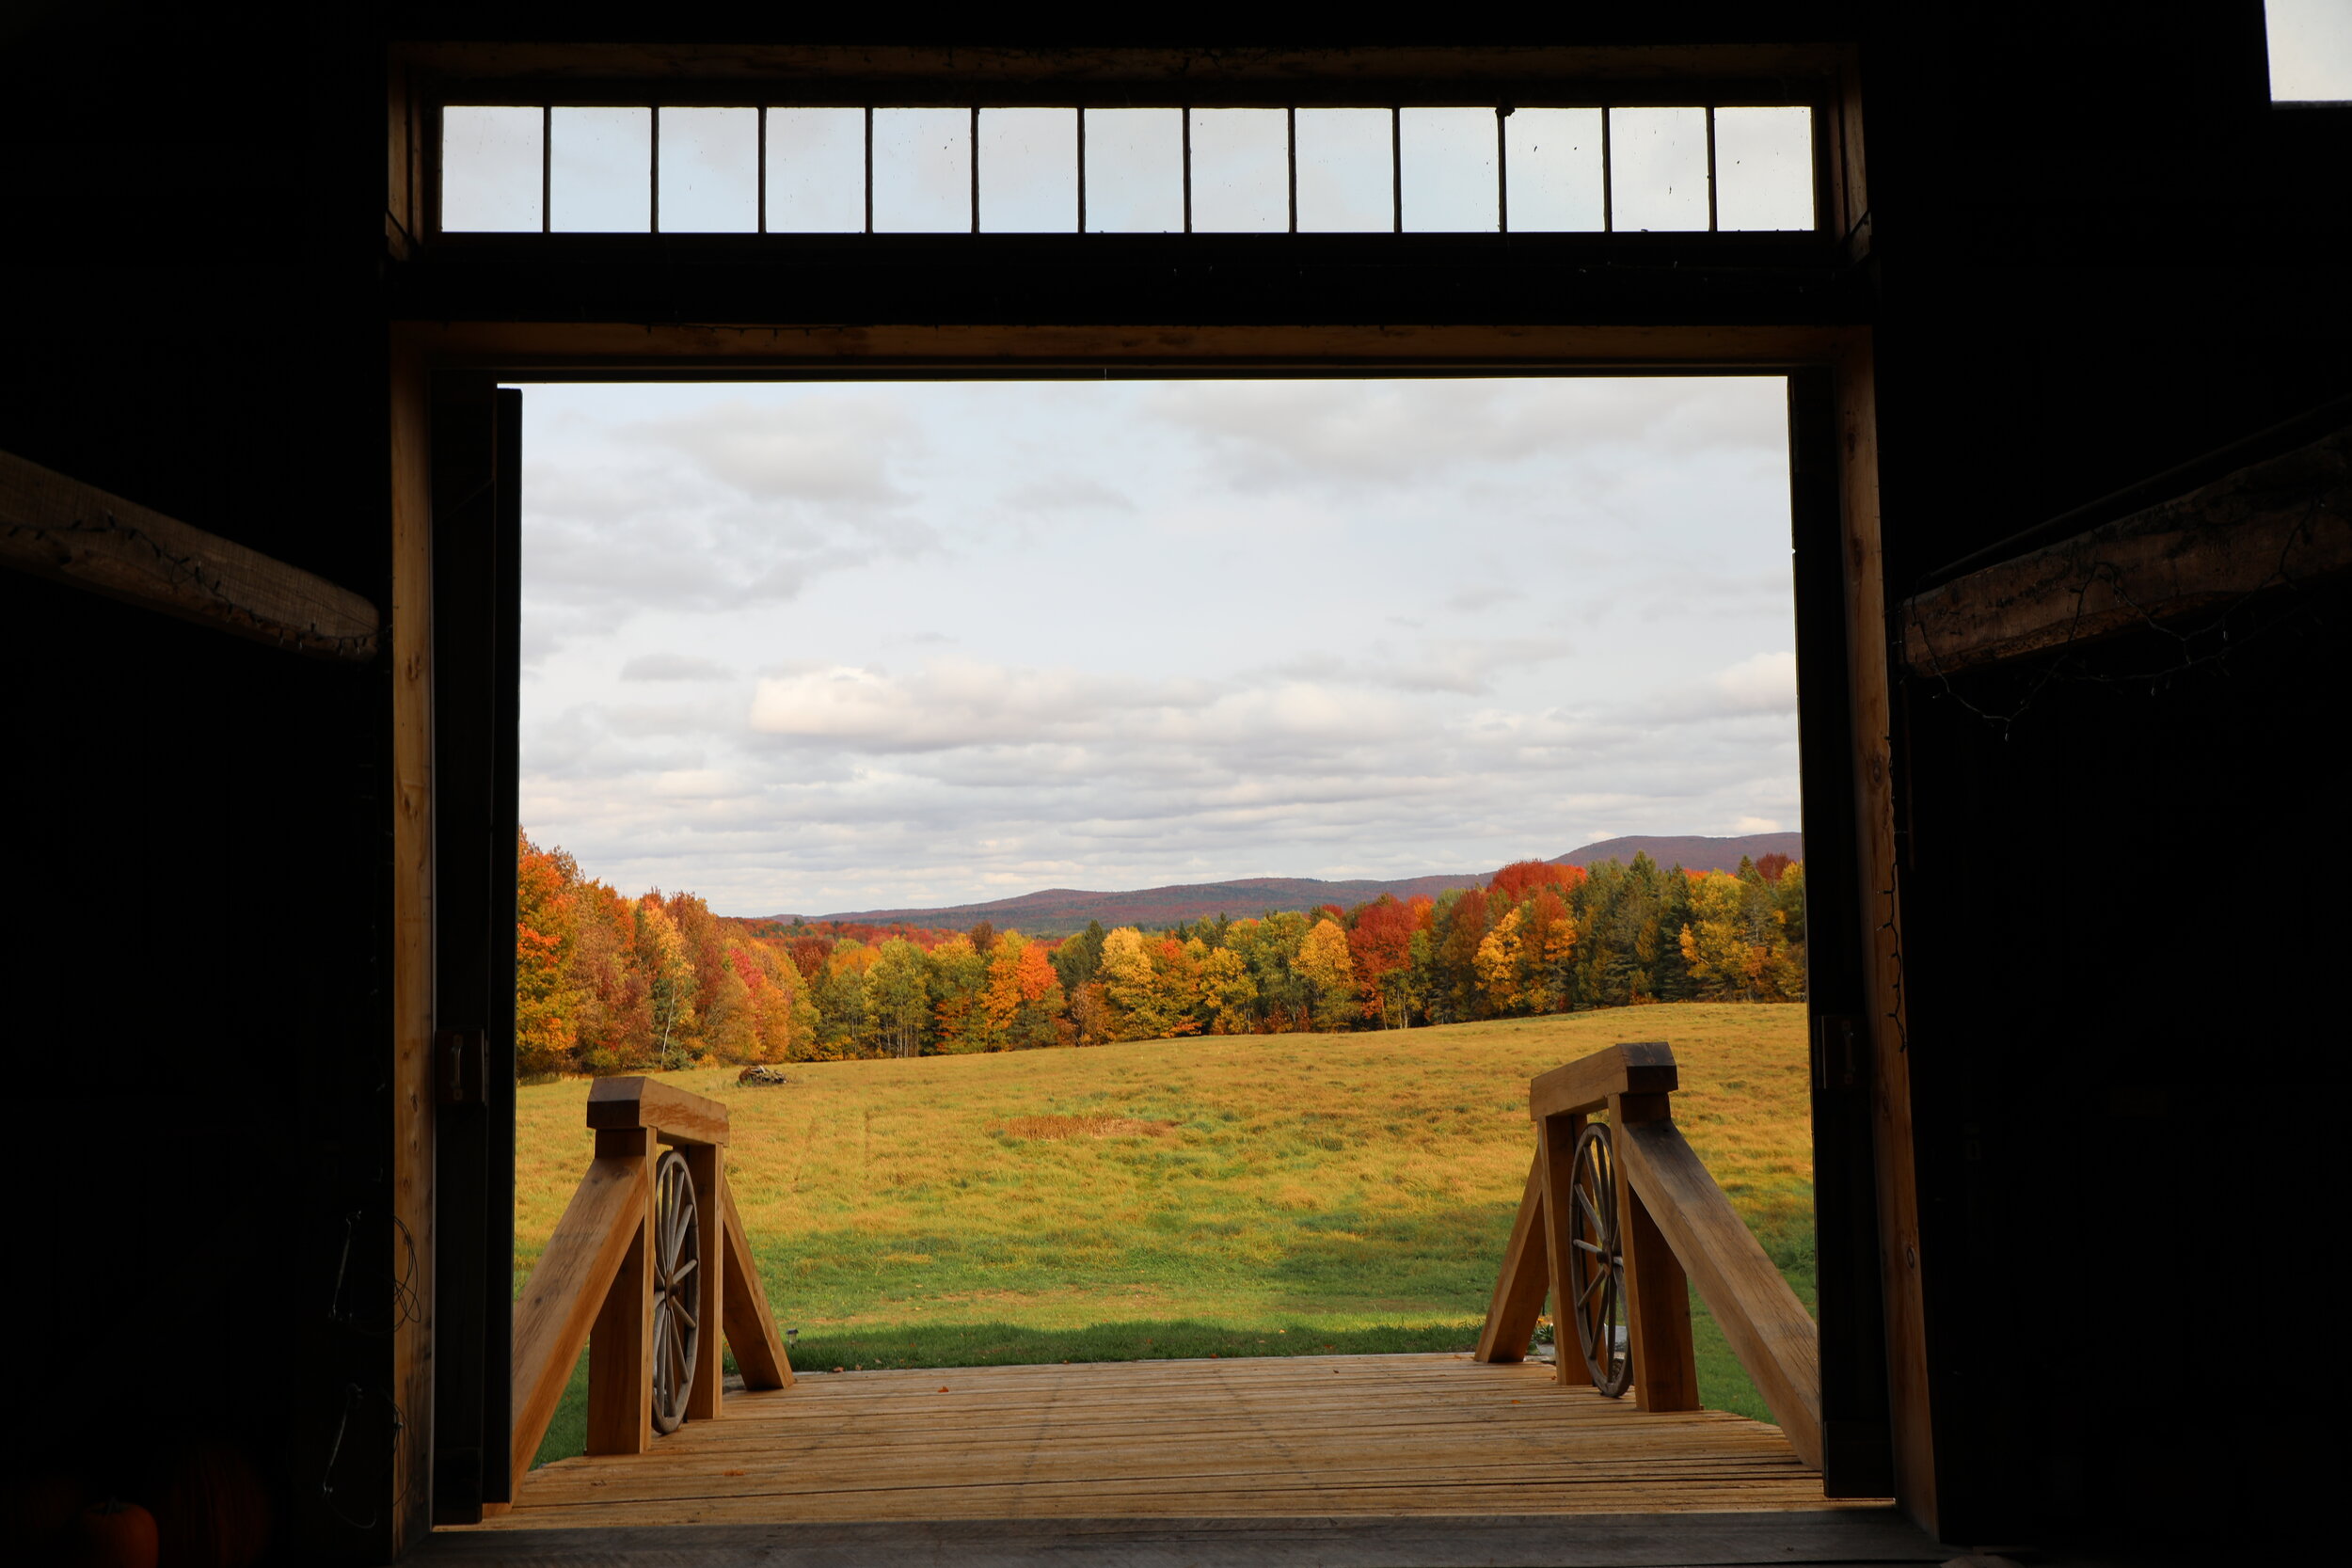 Golden fall trees in the distance seen from inside the barn